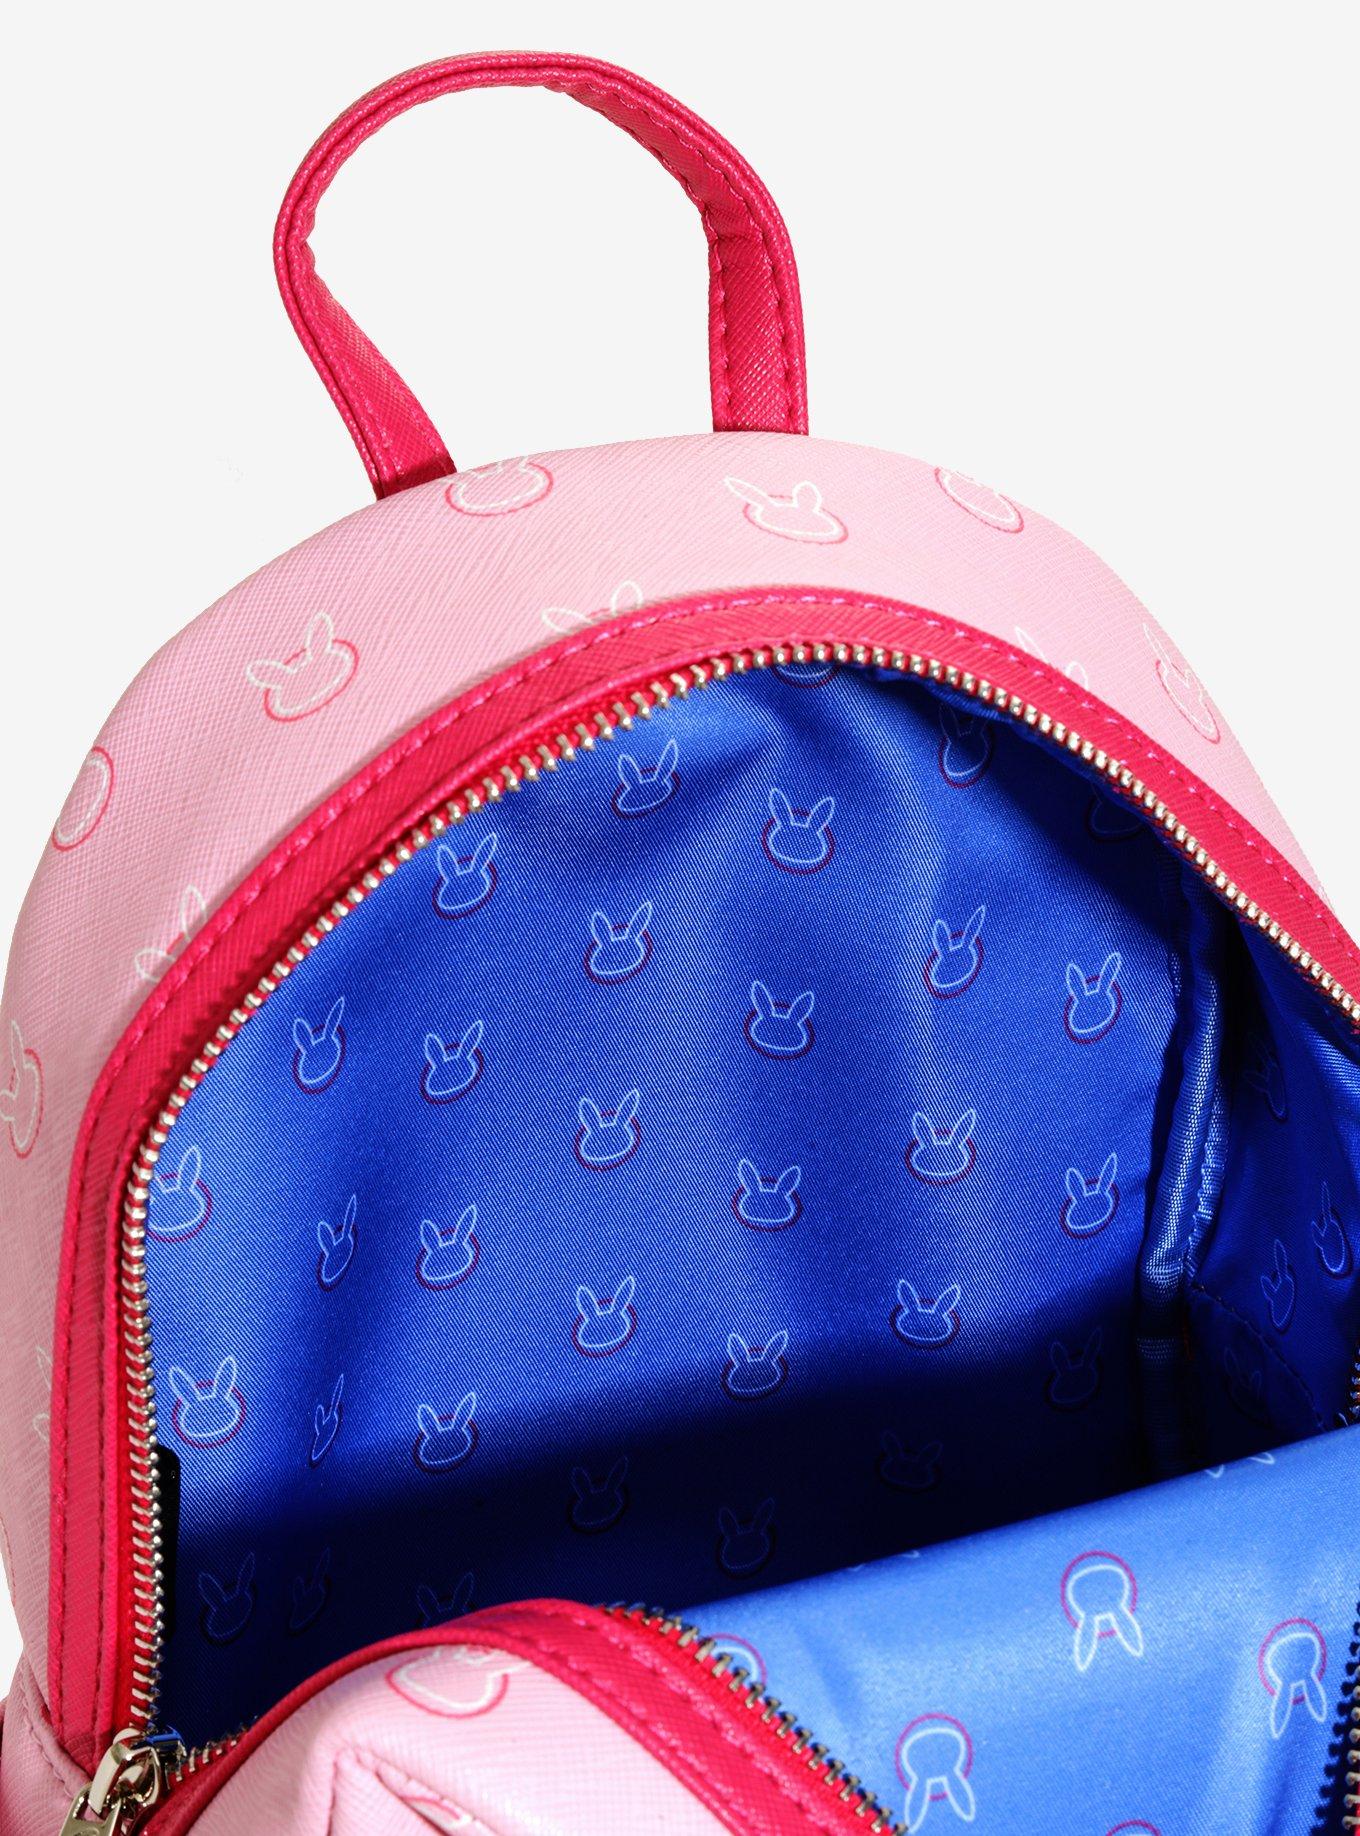 Overwatch DVa Mini Backpack Apparel by Loungefly